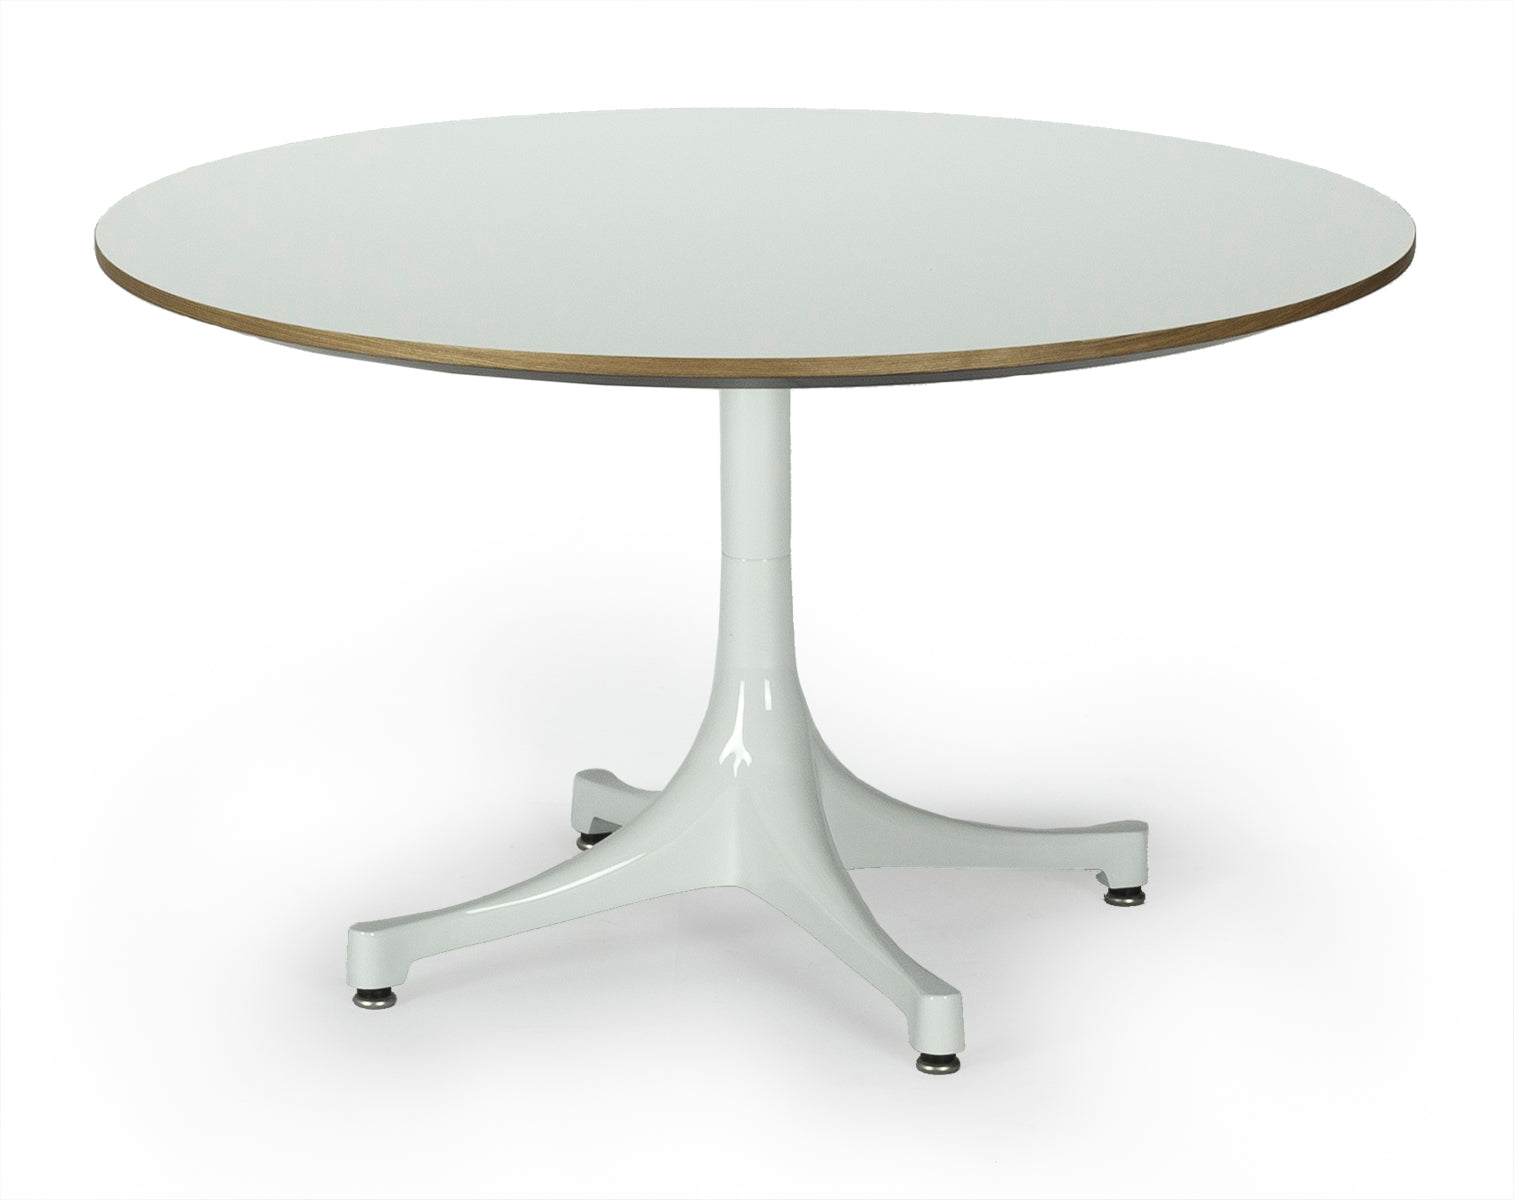 Table d'appoint design blanche